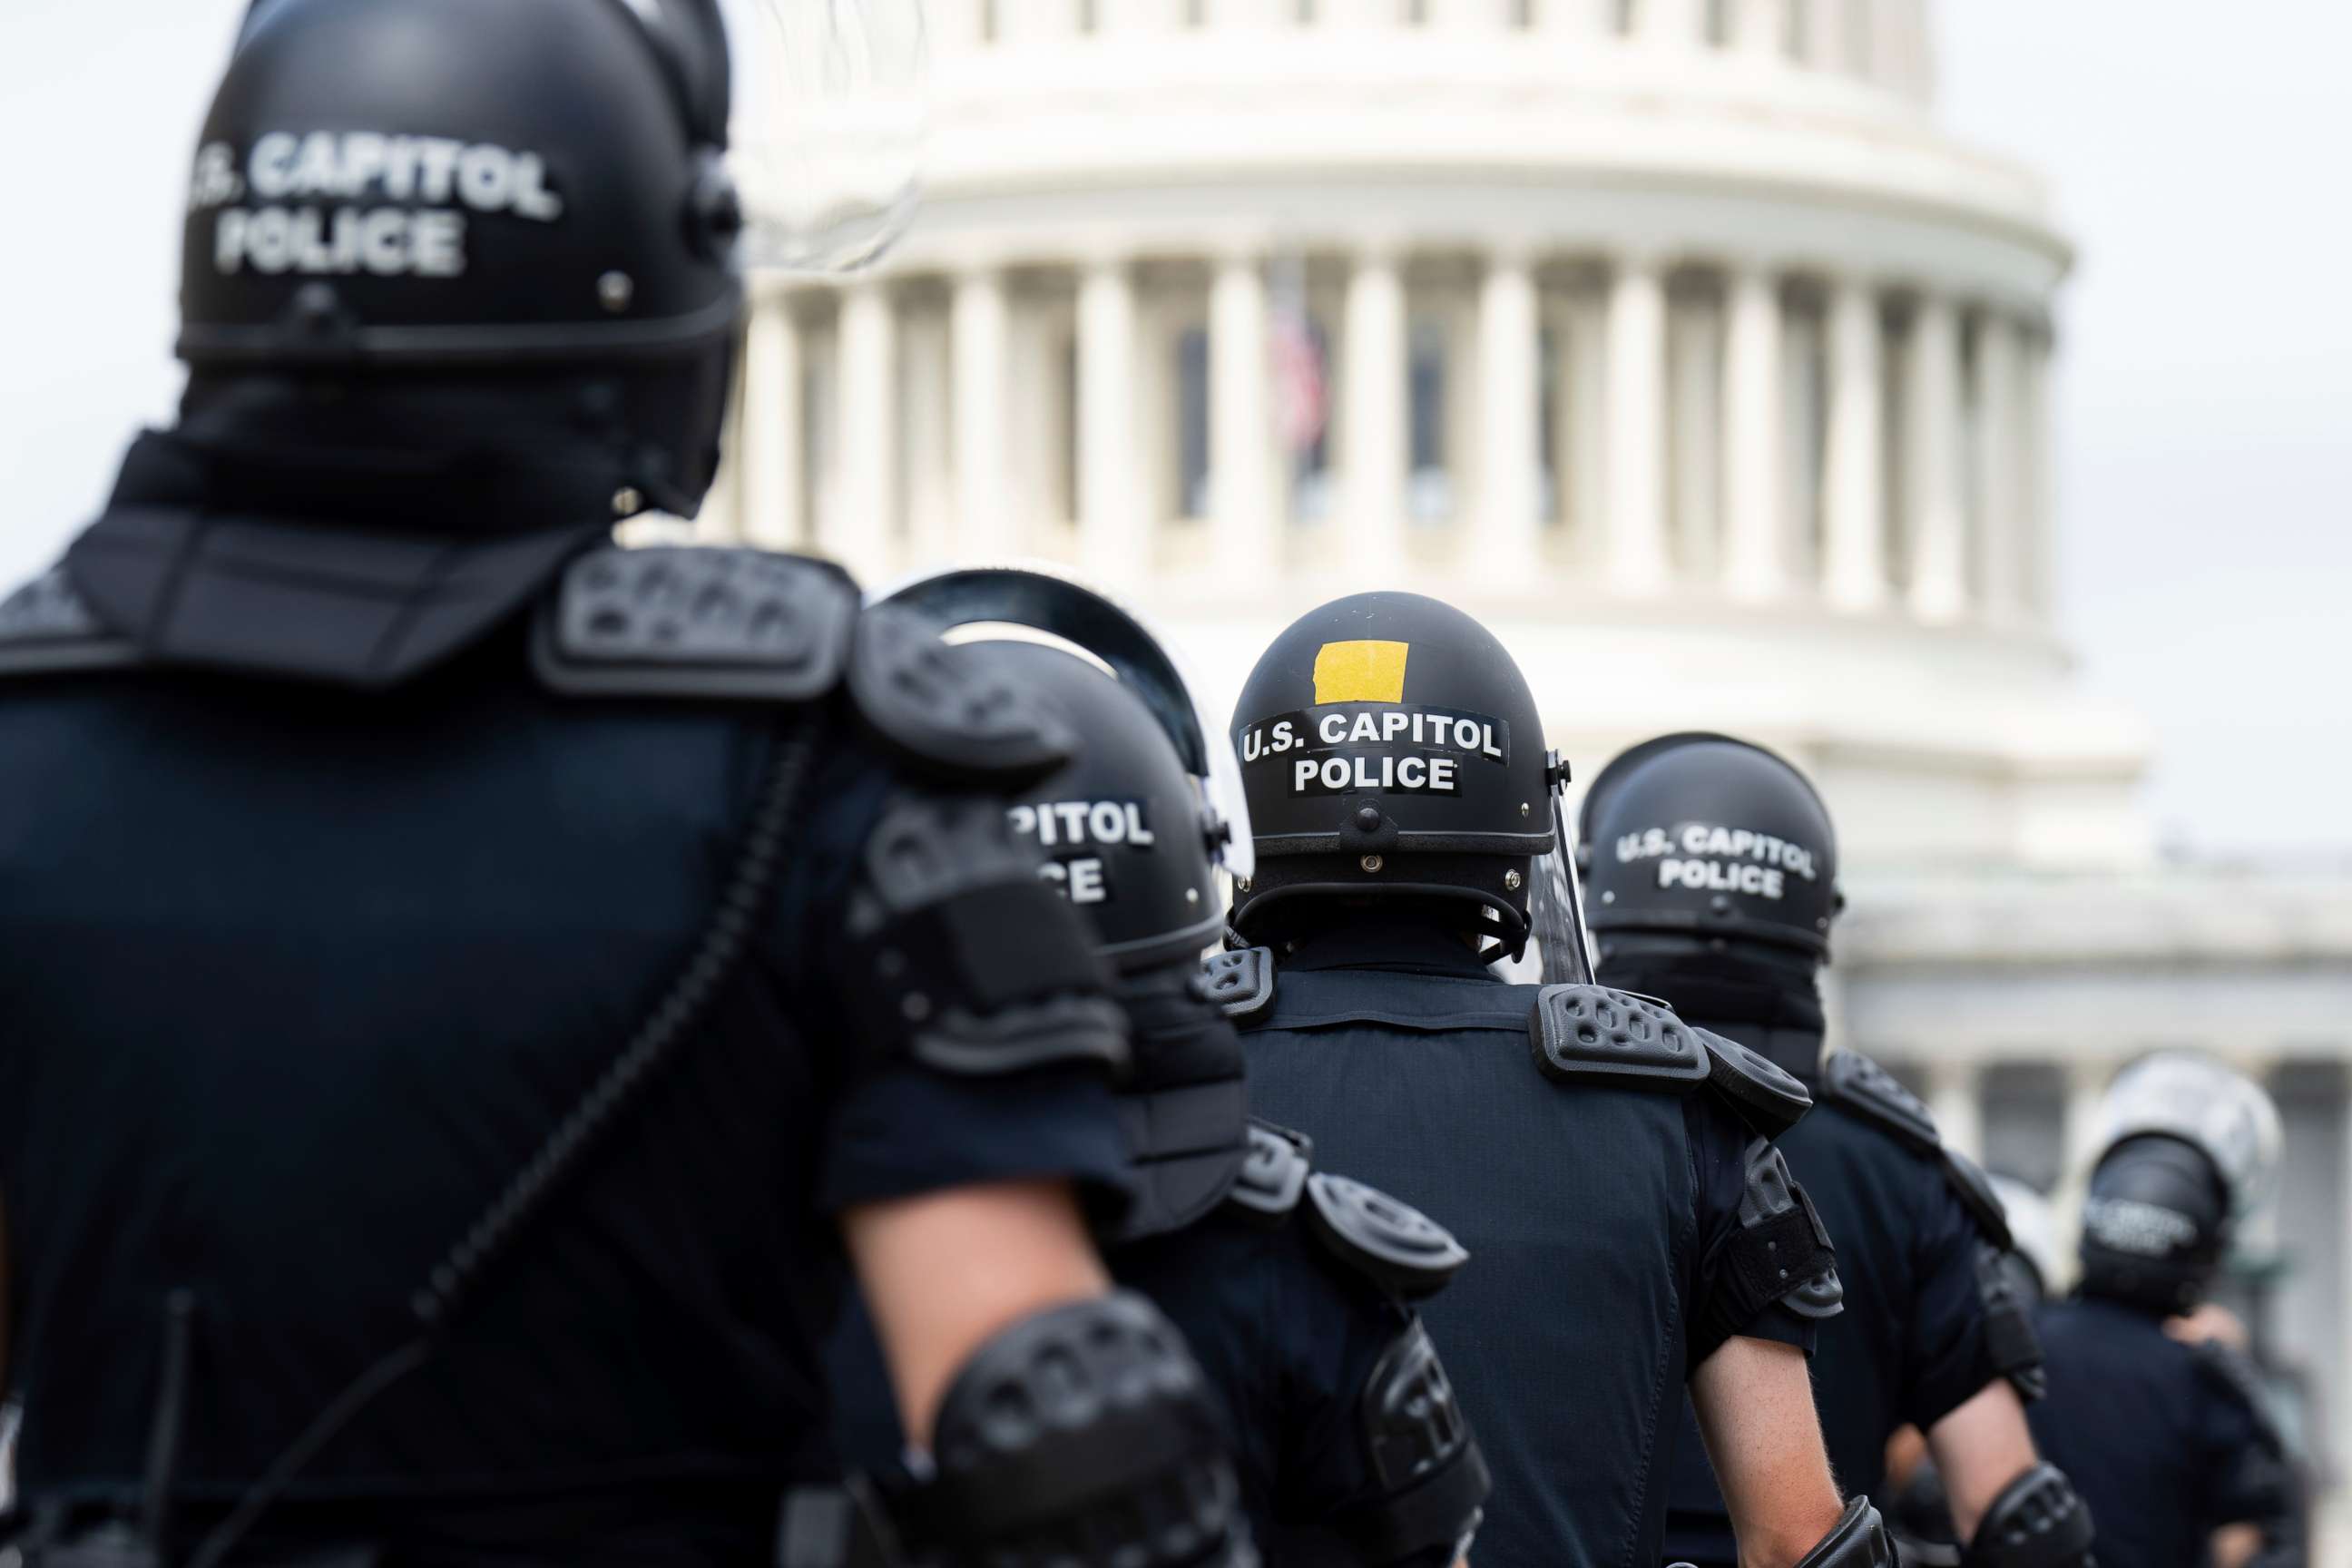 PHOTO: U.S. Capitol Police in riot gear return to their staging area after clear a path back to the Capitol, June 24, 2022.